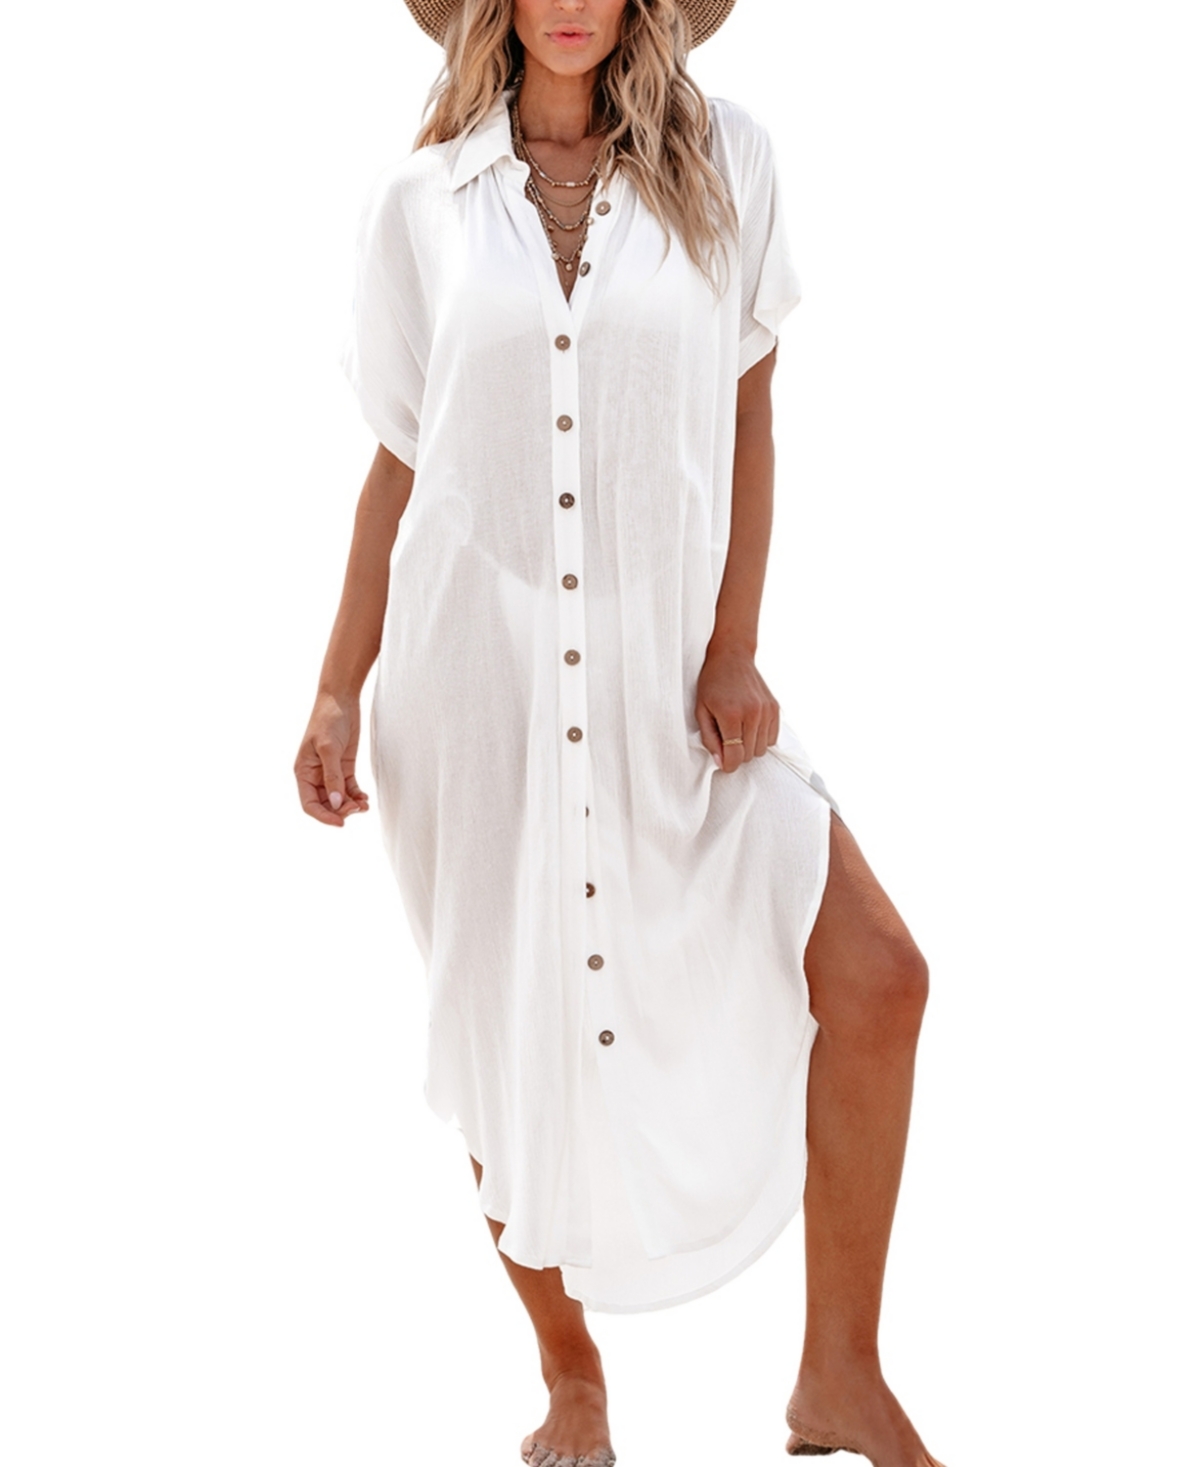 Women's White Collared Button Up Cover-Up Beach Dress - White